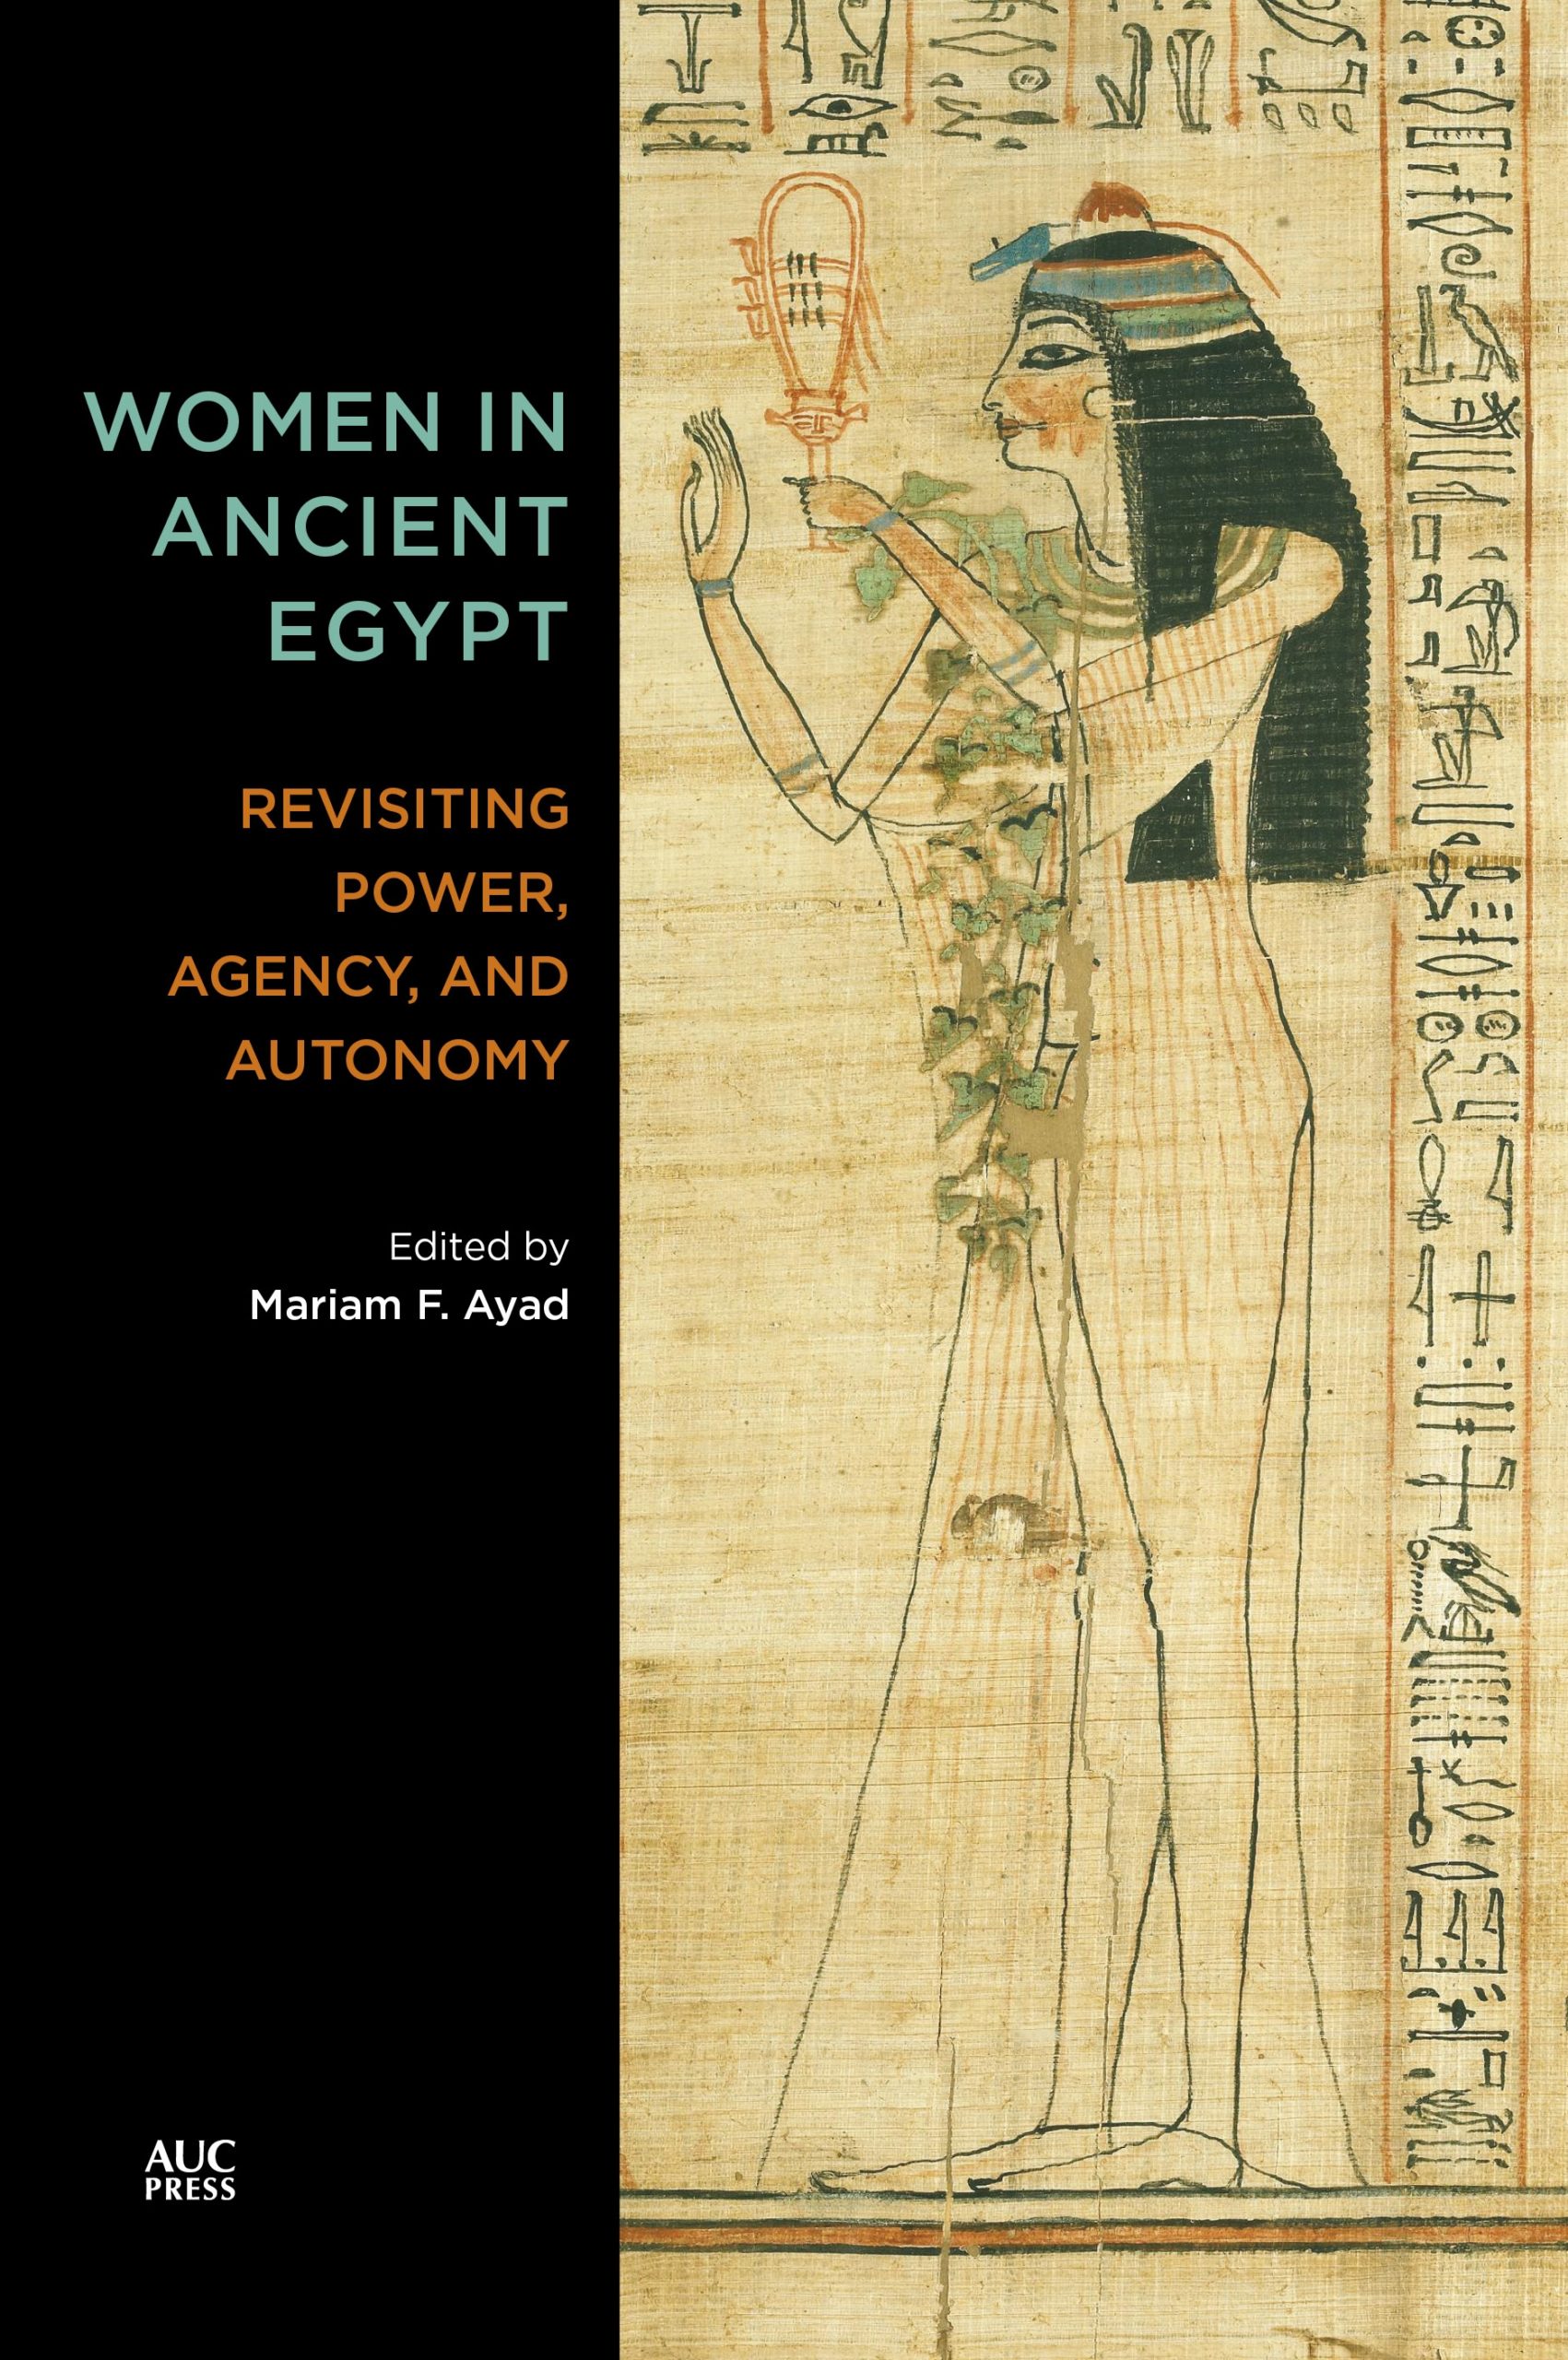 Women in Ancient Egypt book cover